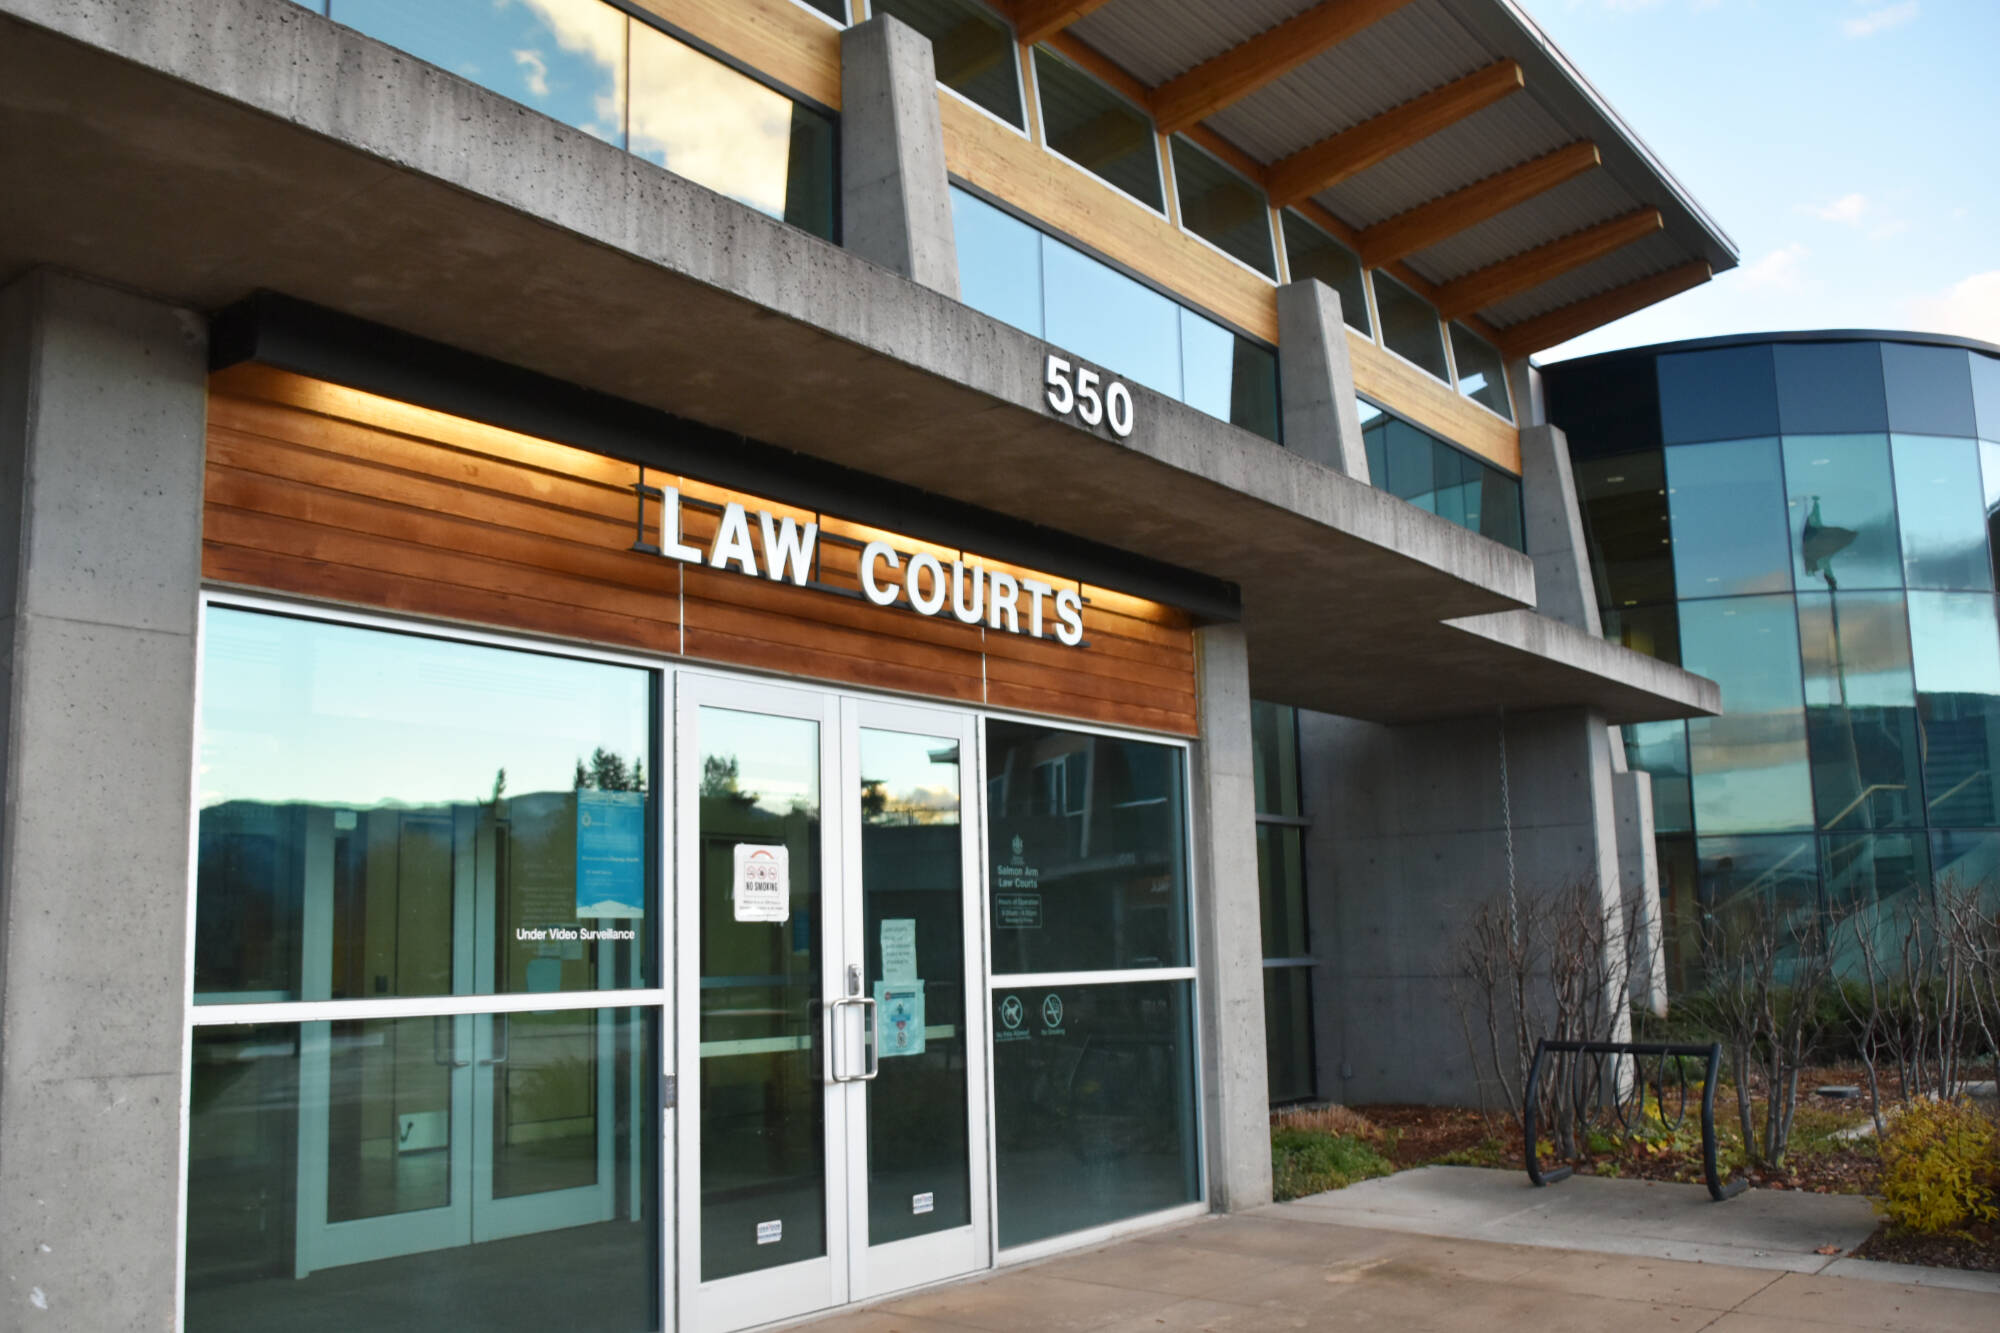 Dorian Bell appeared via video in BC Supreme Court in Salmon Arm on June 10, 2022 to be sentenced on three charges, one of them dangerous driving causing death stemming from a May 2021 incident near the Bruhn Bridge in Sicamous that resulted in the death of a Malakwa woman. (File photo)